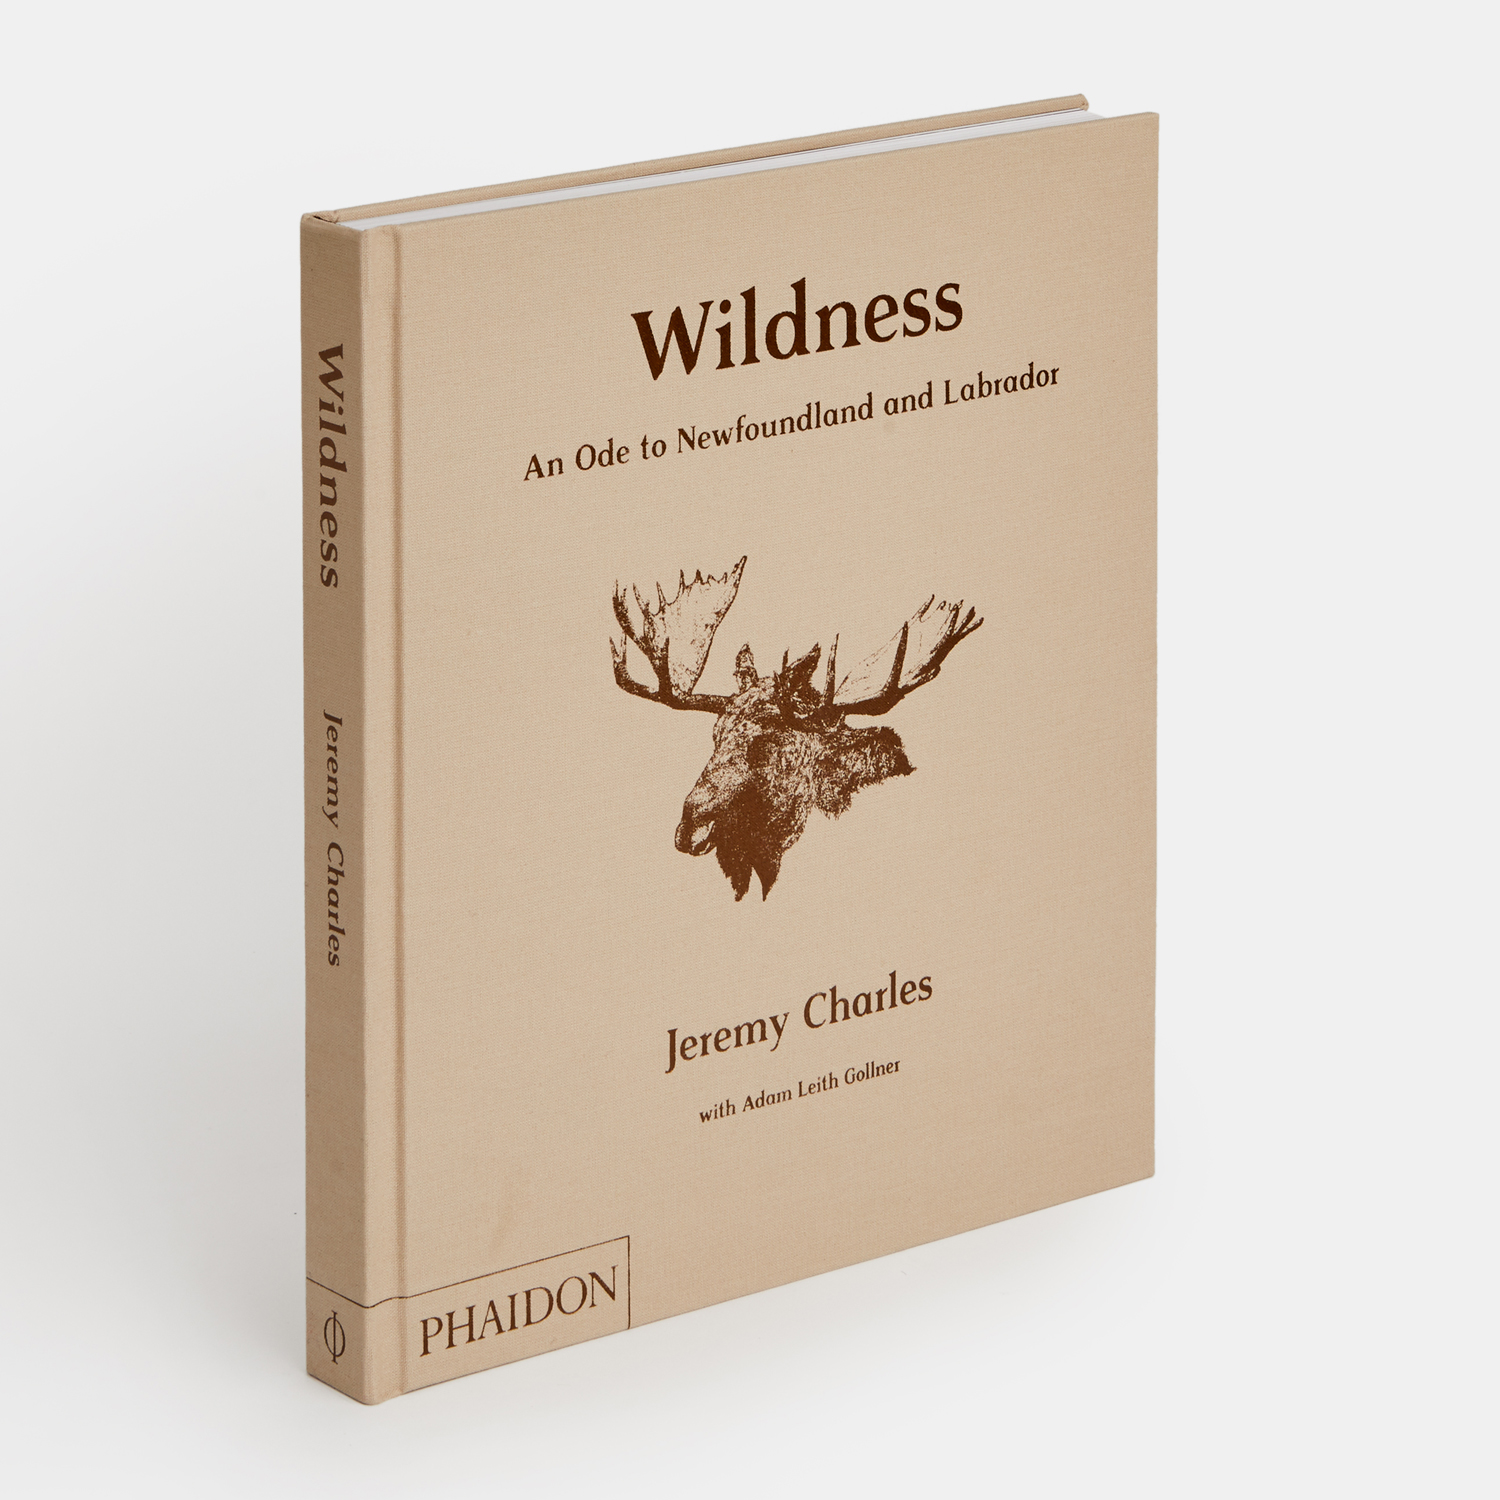 Wildness by Jeremy Charles